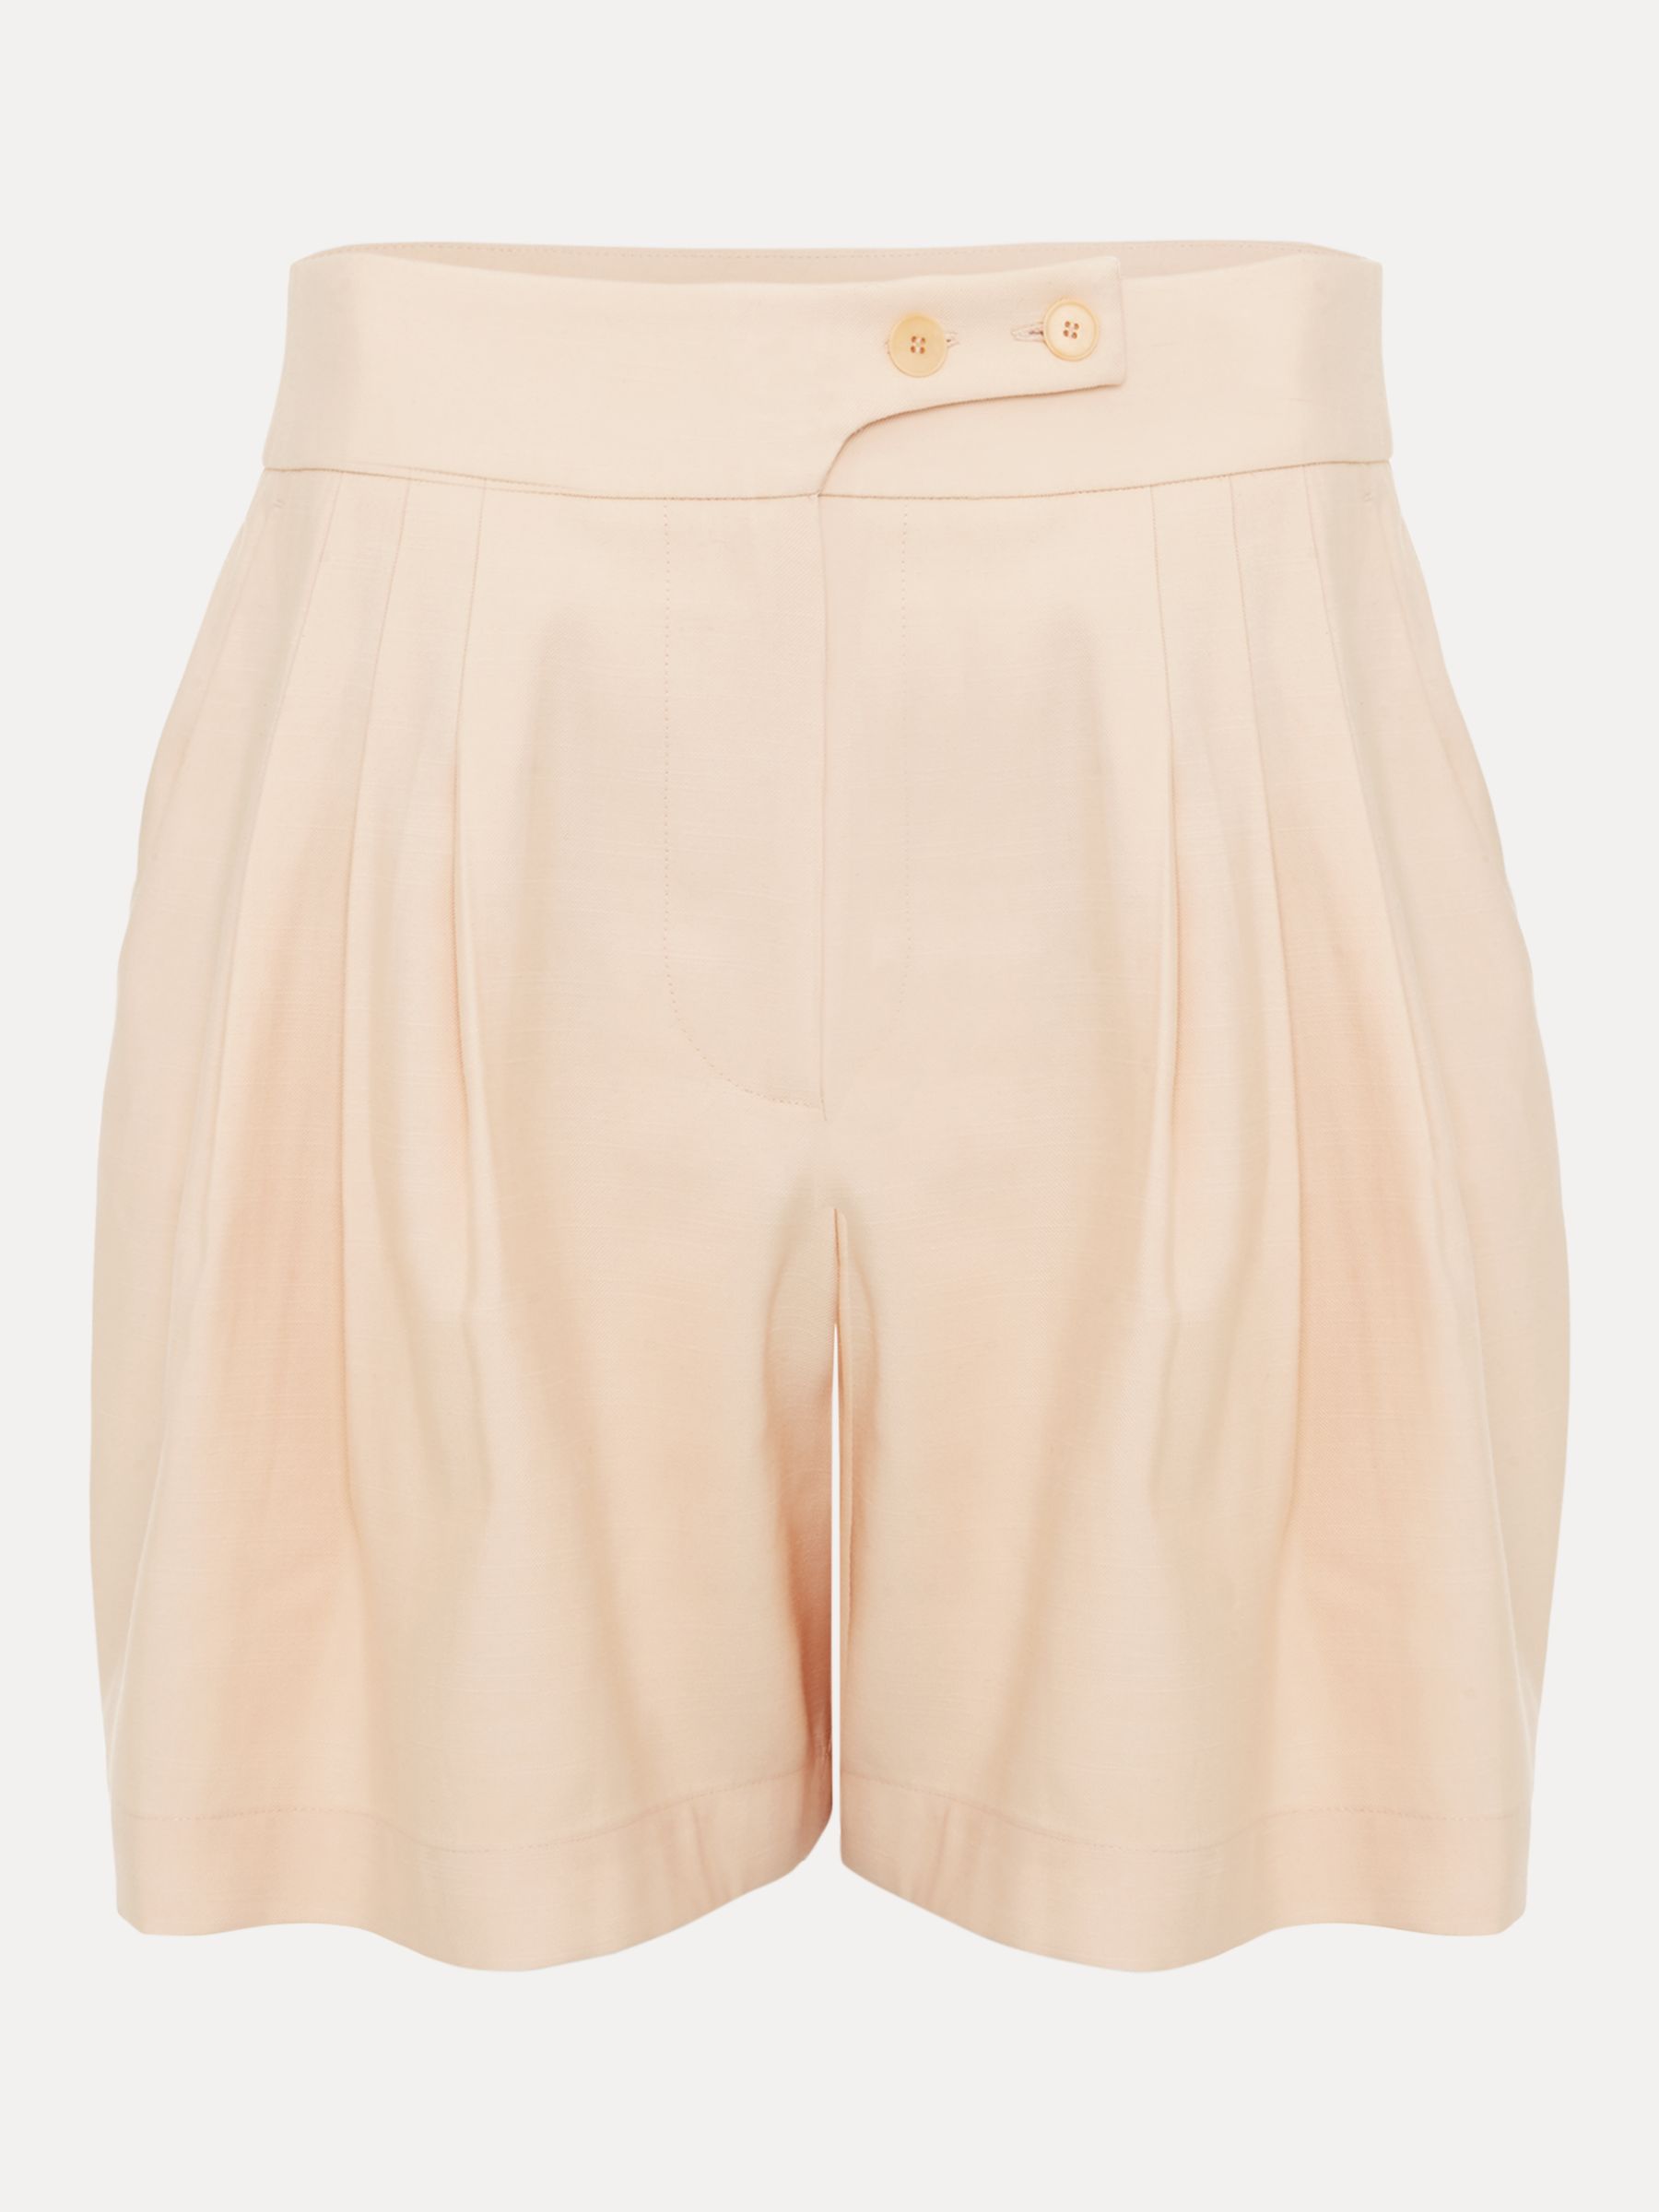 Phase Eight Bianca Ecovero Shorts, Coral, 12